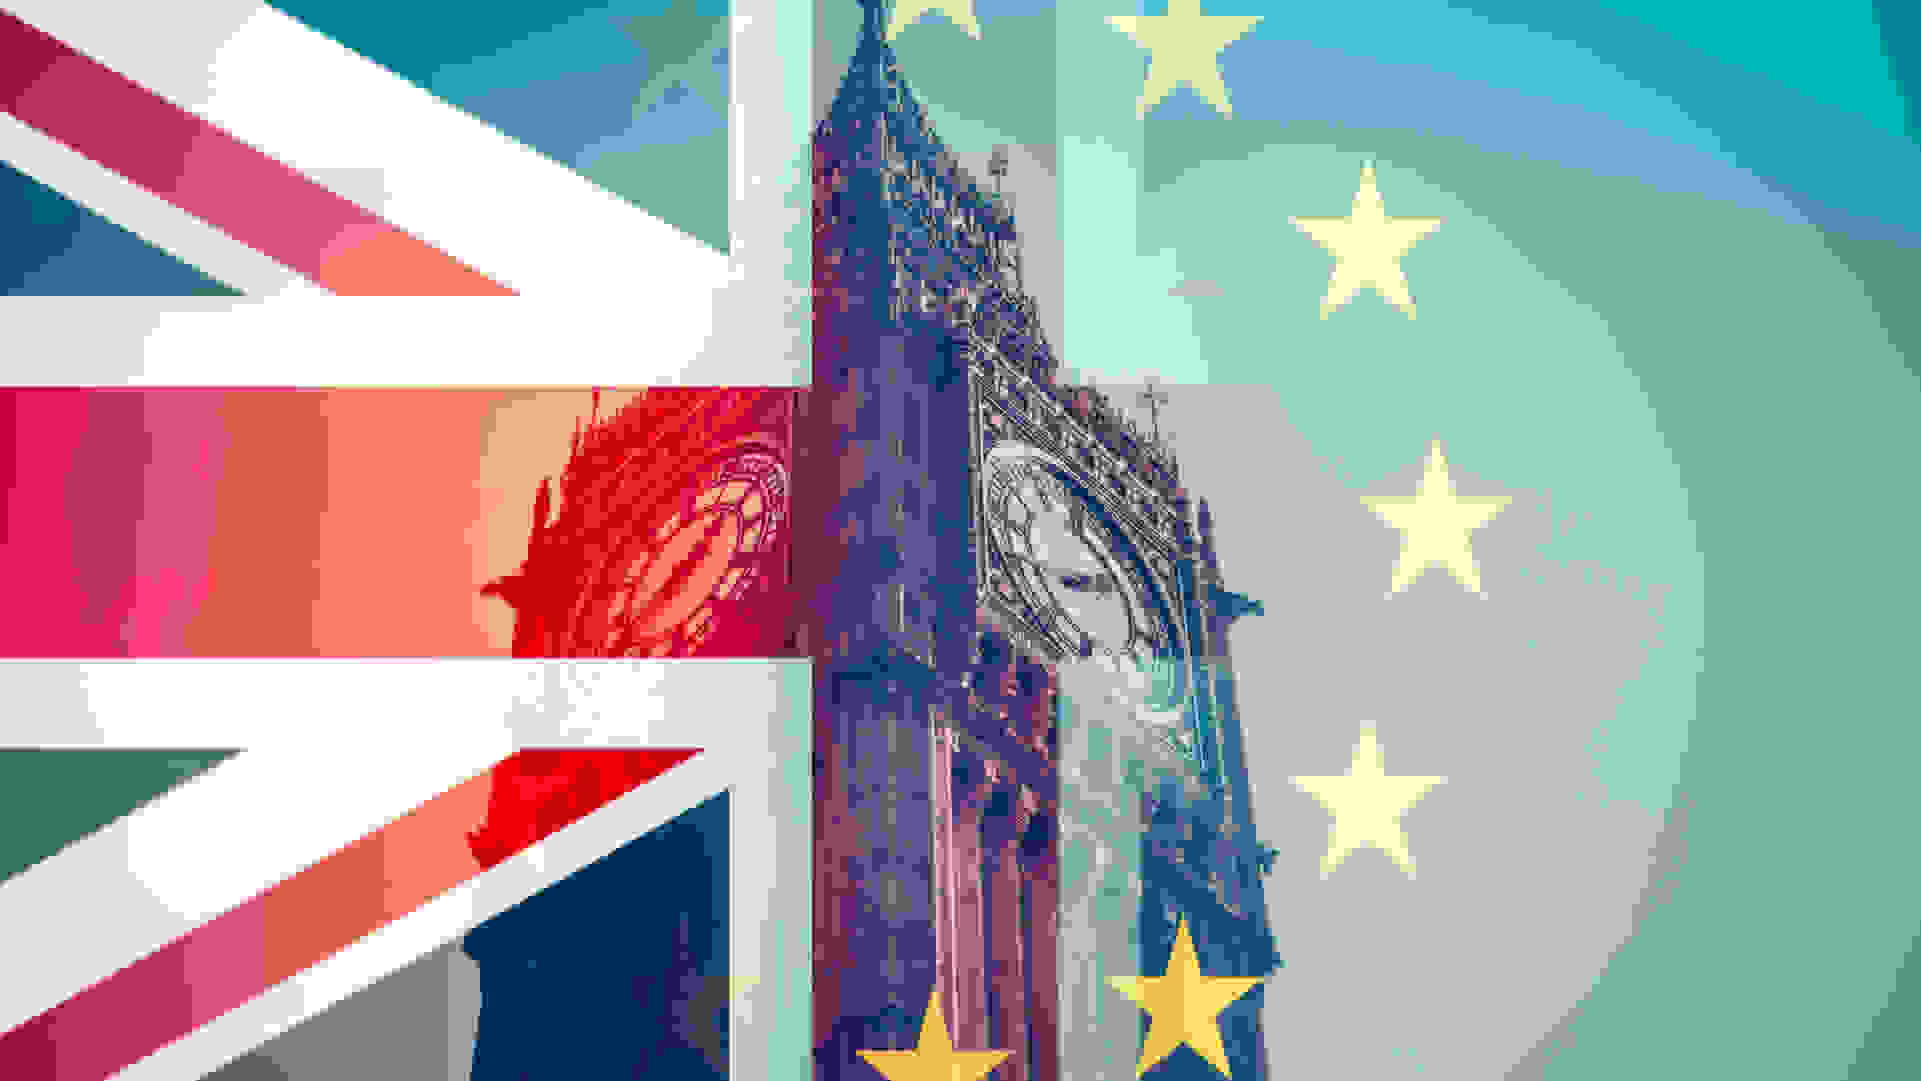 EU and UK flags superimposed on Big Ben, UK Parliament, Westminster | CC-BY-ND